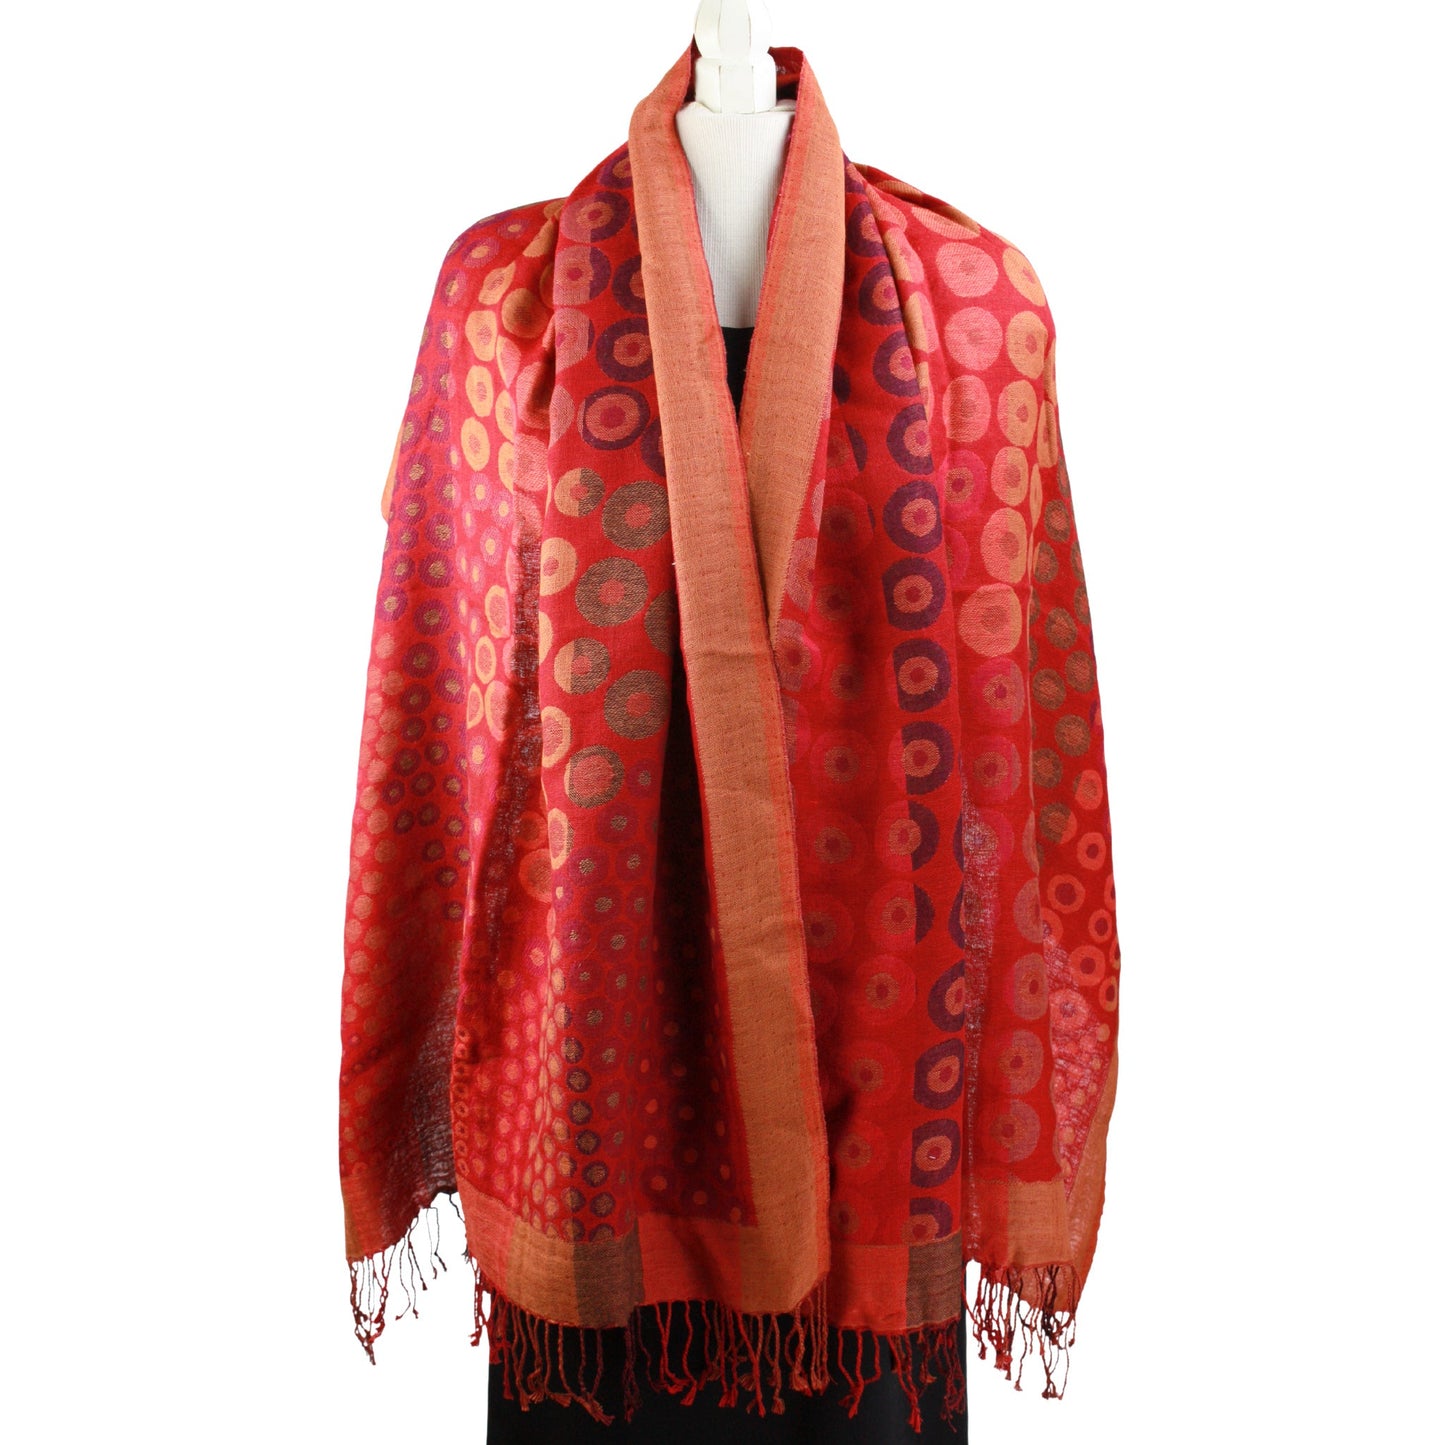 Kalya scarf in reds and oranges